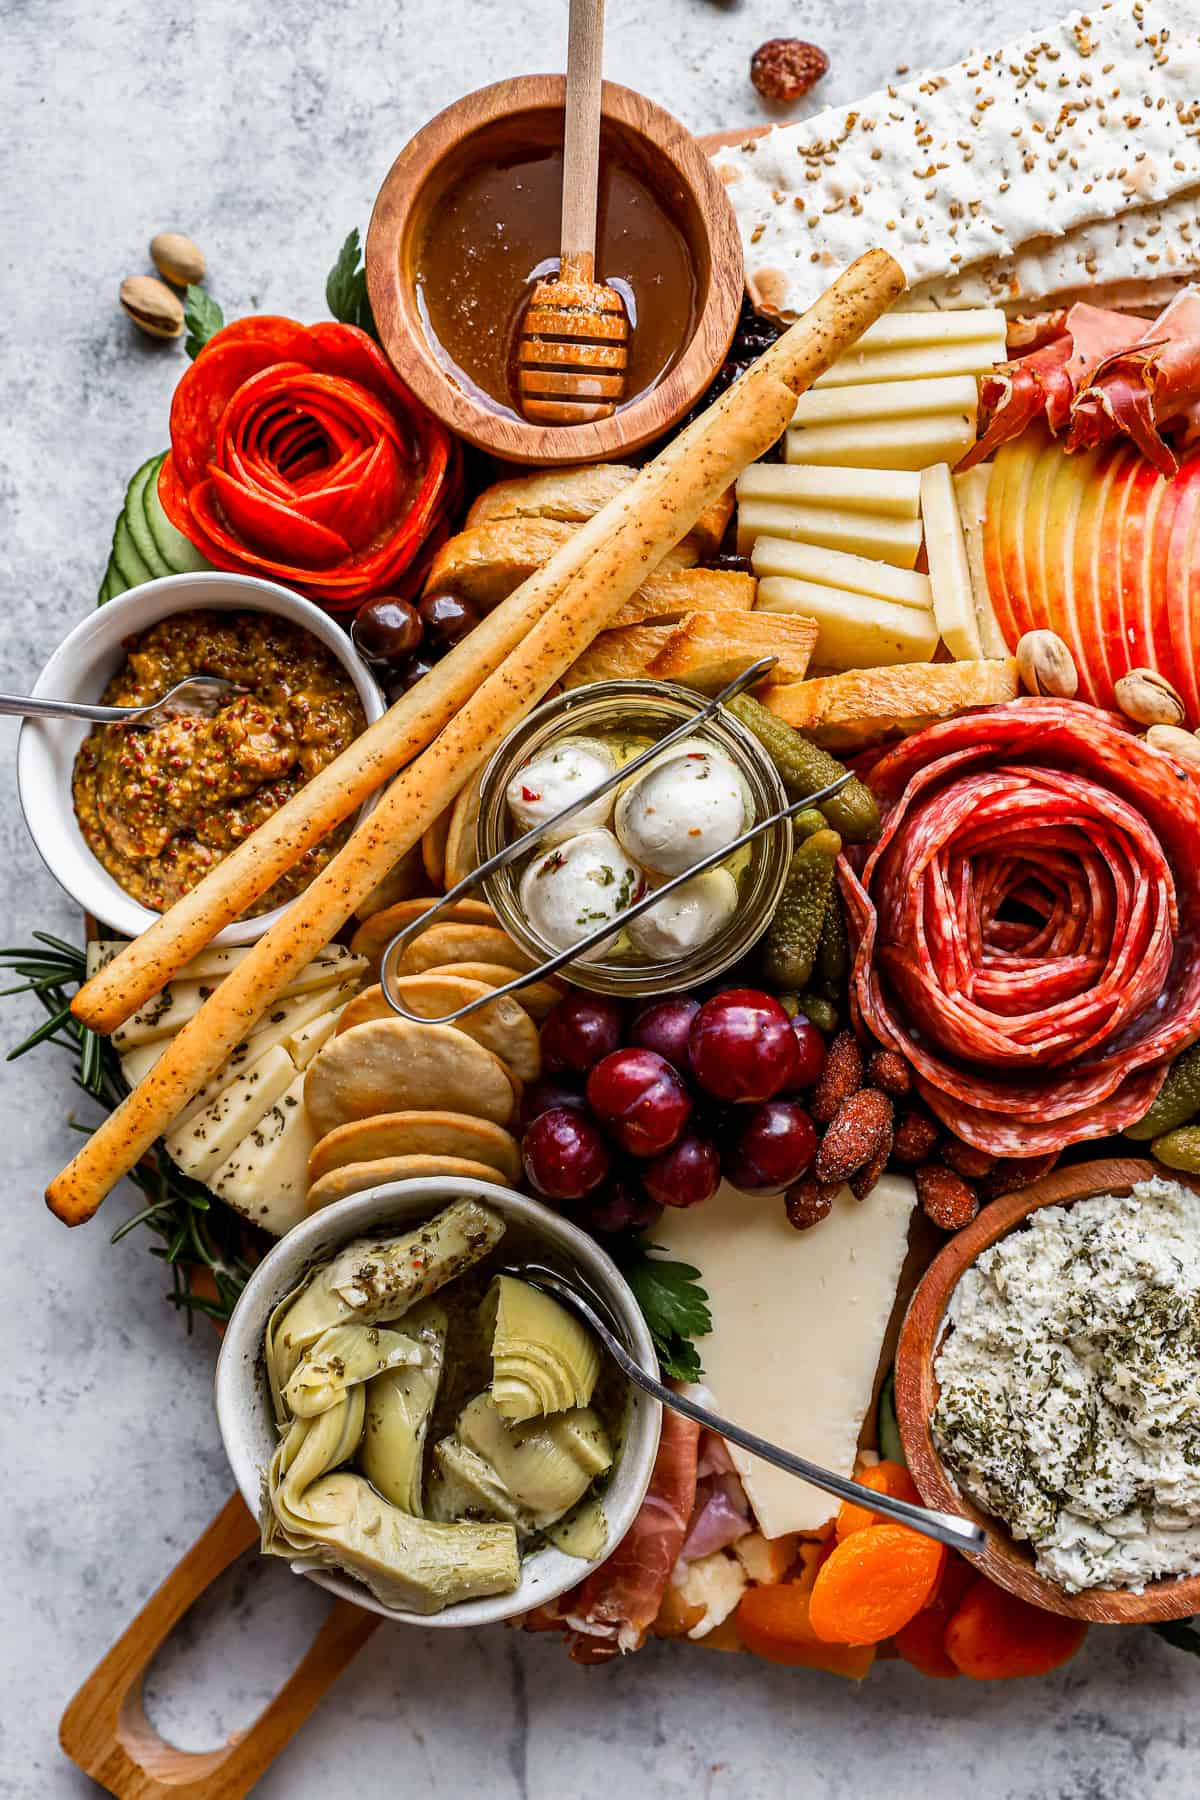 A charcuterie board with a variety of meats, cheeses, and crackers.